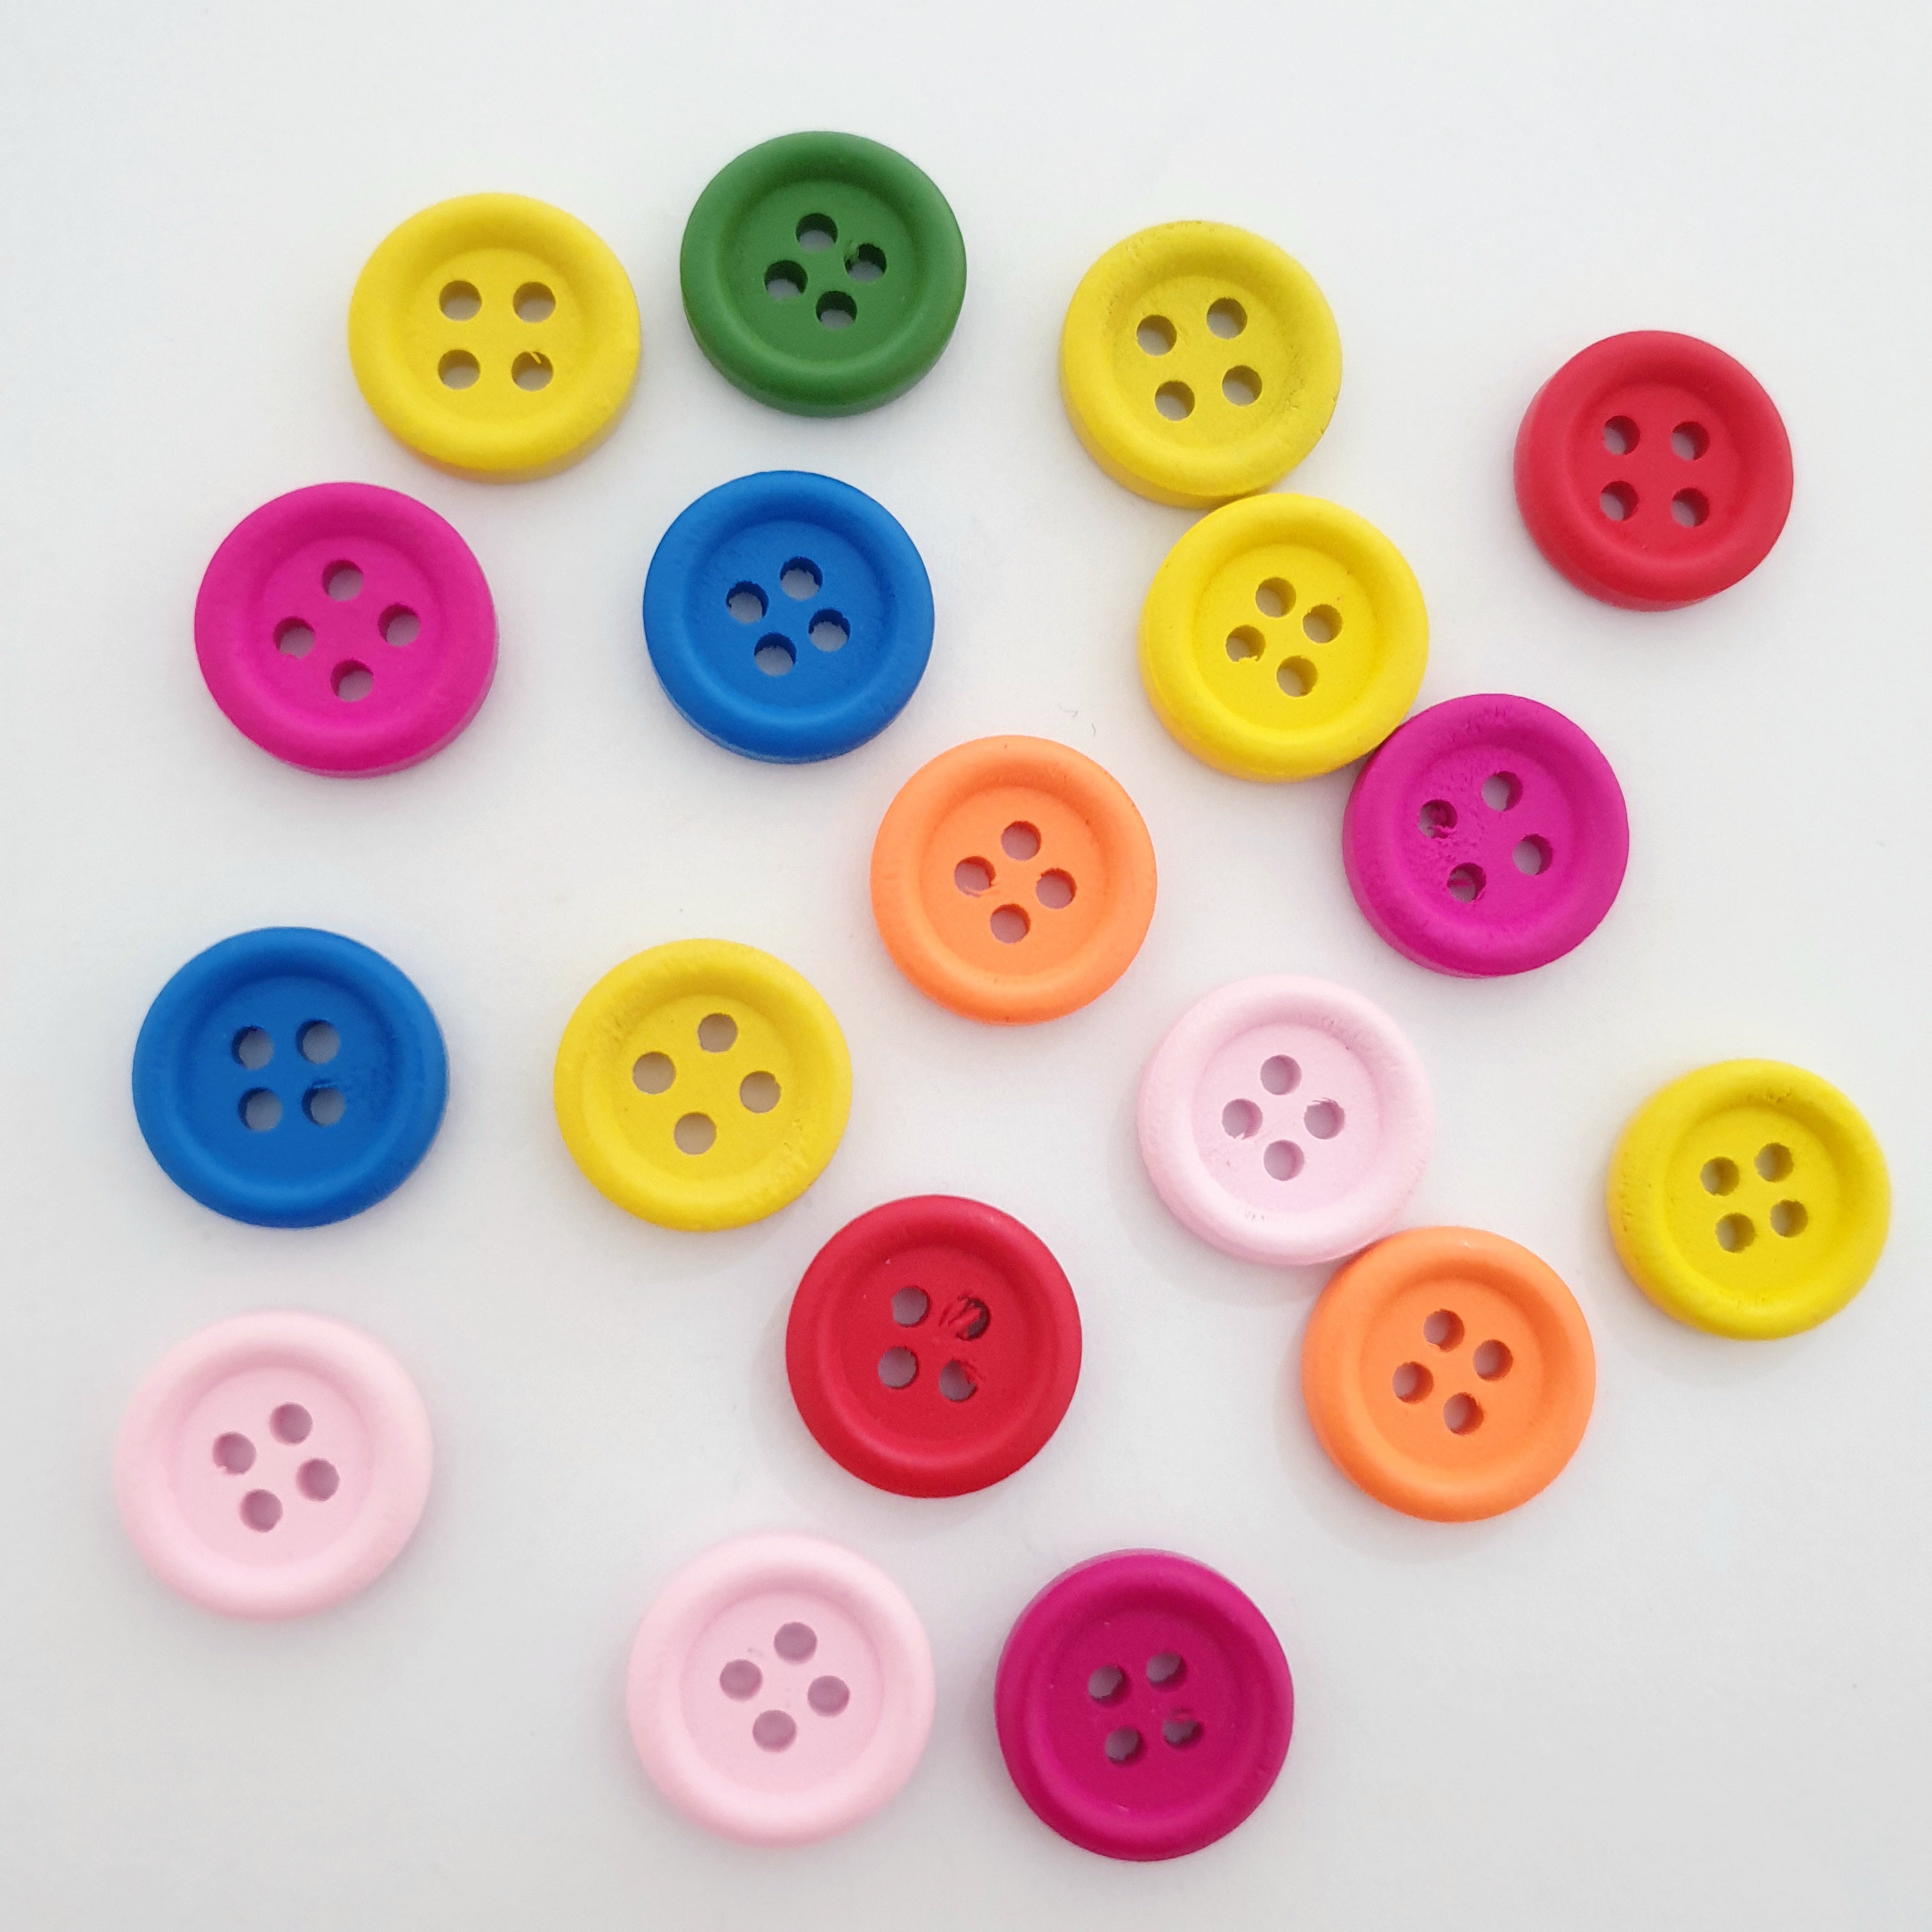 MajorCrafts 44pcs 15mm Randomly Mixed Colours Round 4 Holes Wooden Sewing Buttons